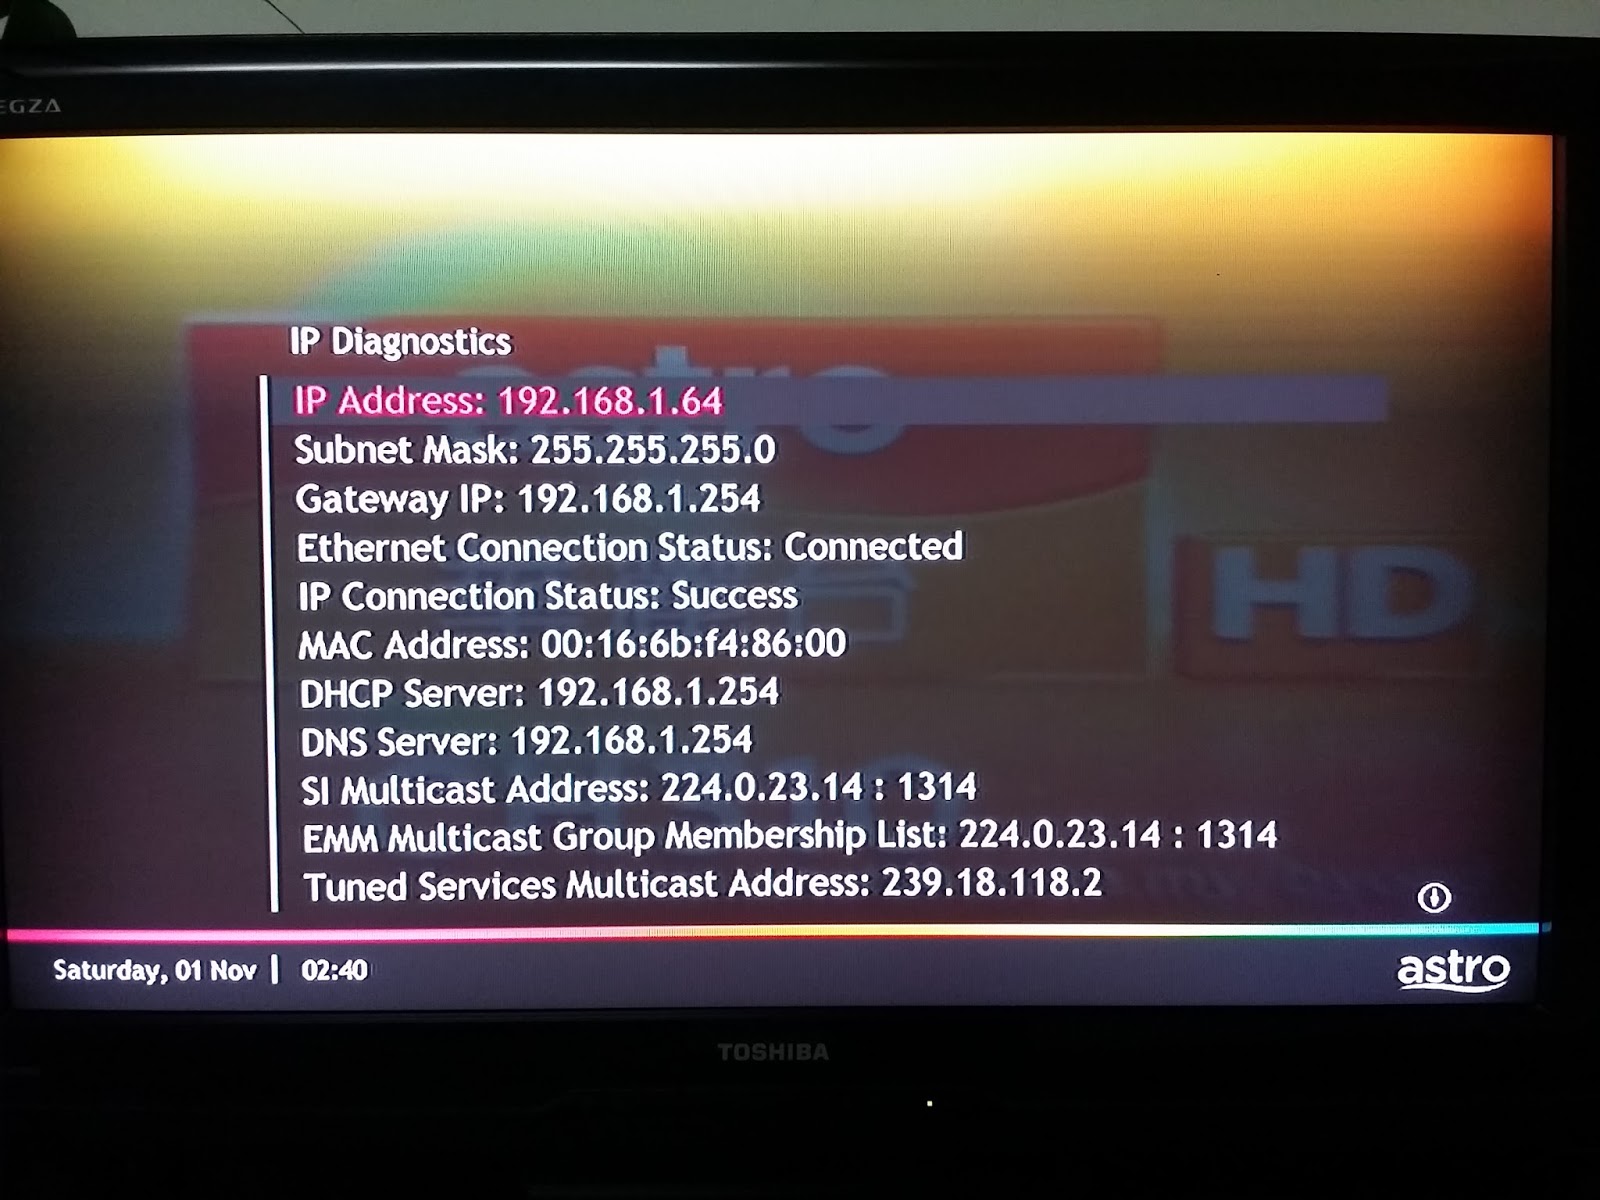 indsats Pengeudlån verden bits here and there ...: Asus RT-AC68U with Maxis fiber and Astro IPTV